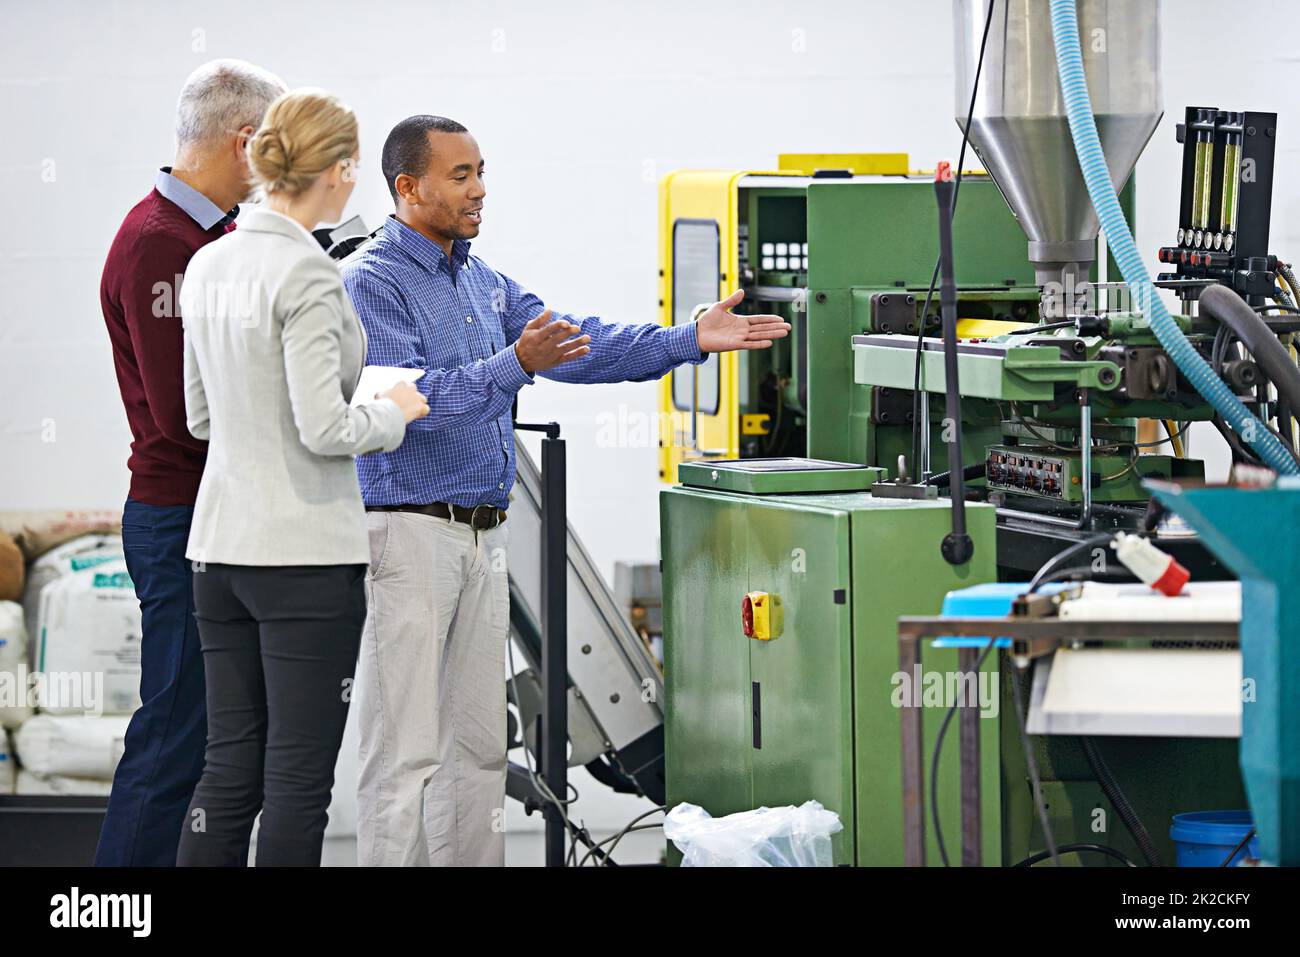 Managing the factory floor. Shot of a managers inspecting factory machinery. Stock Photo